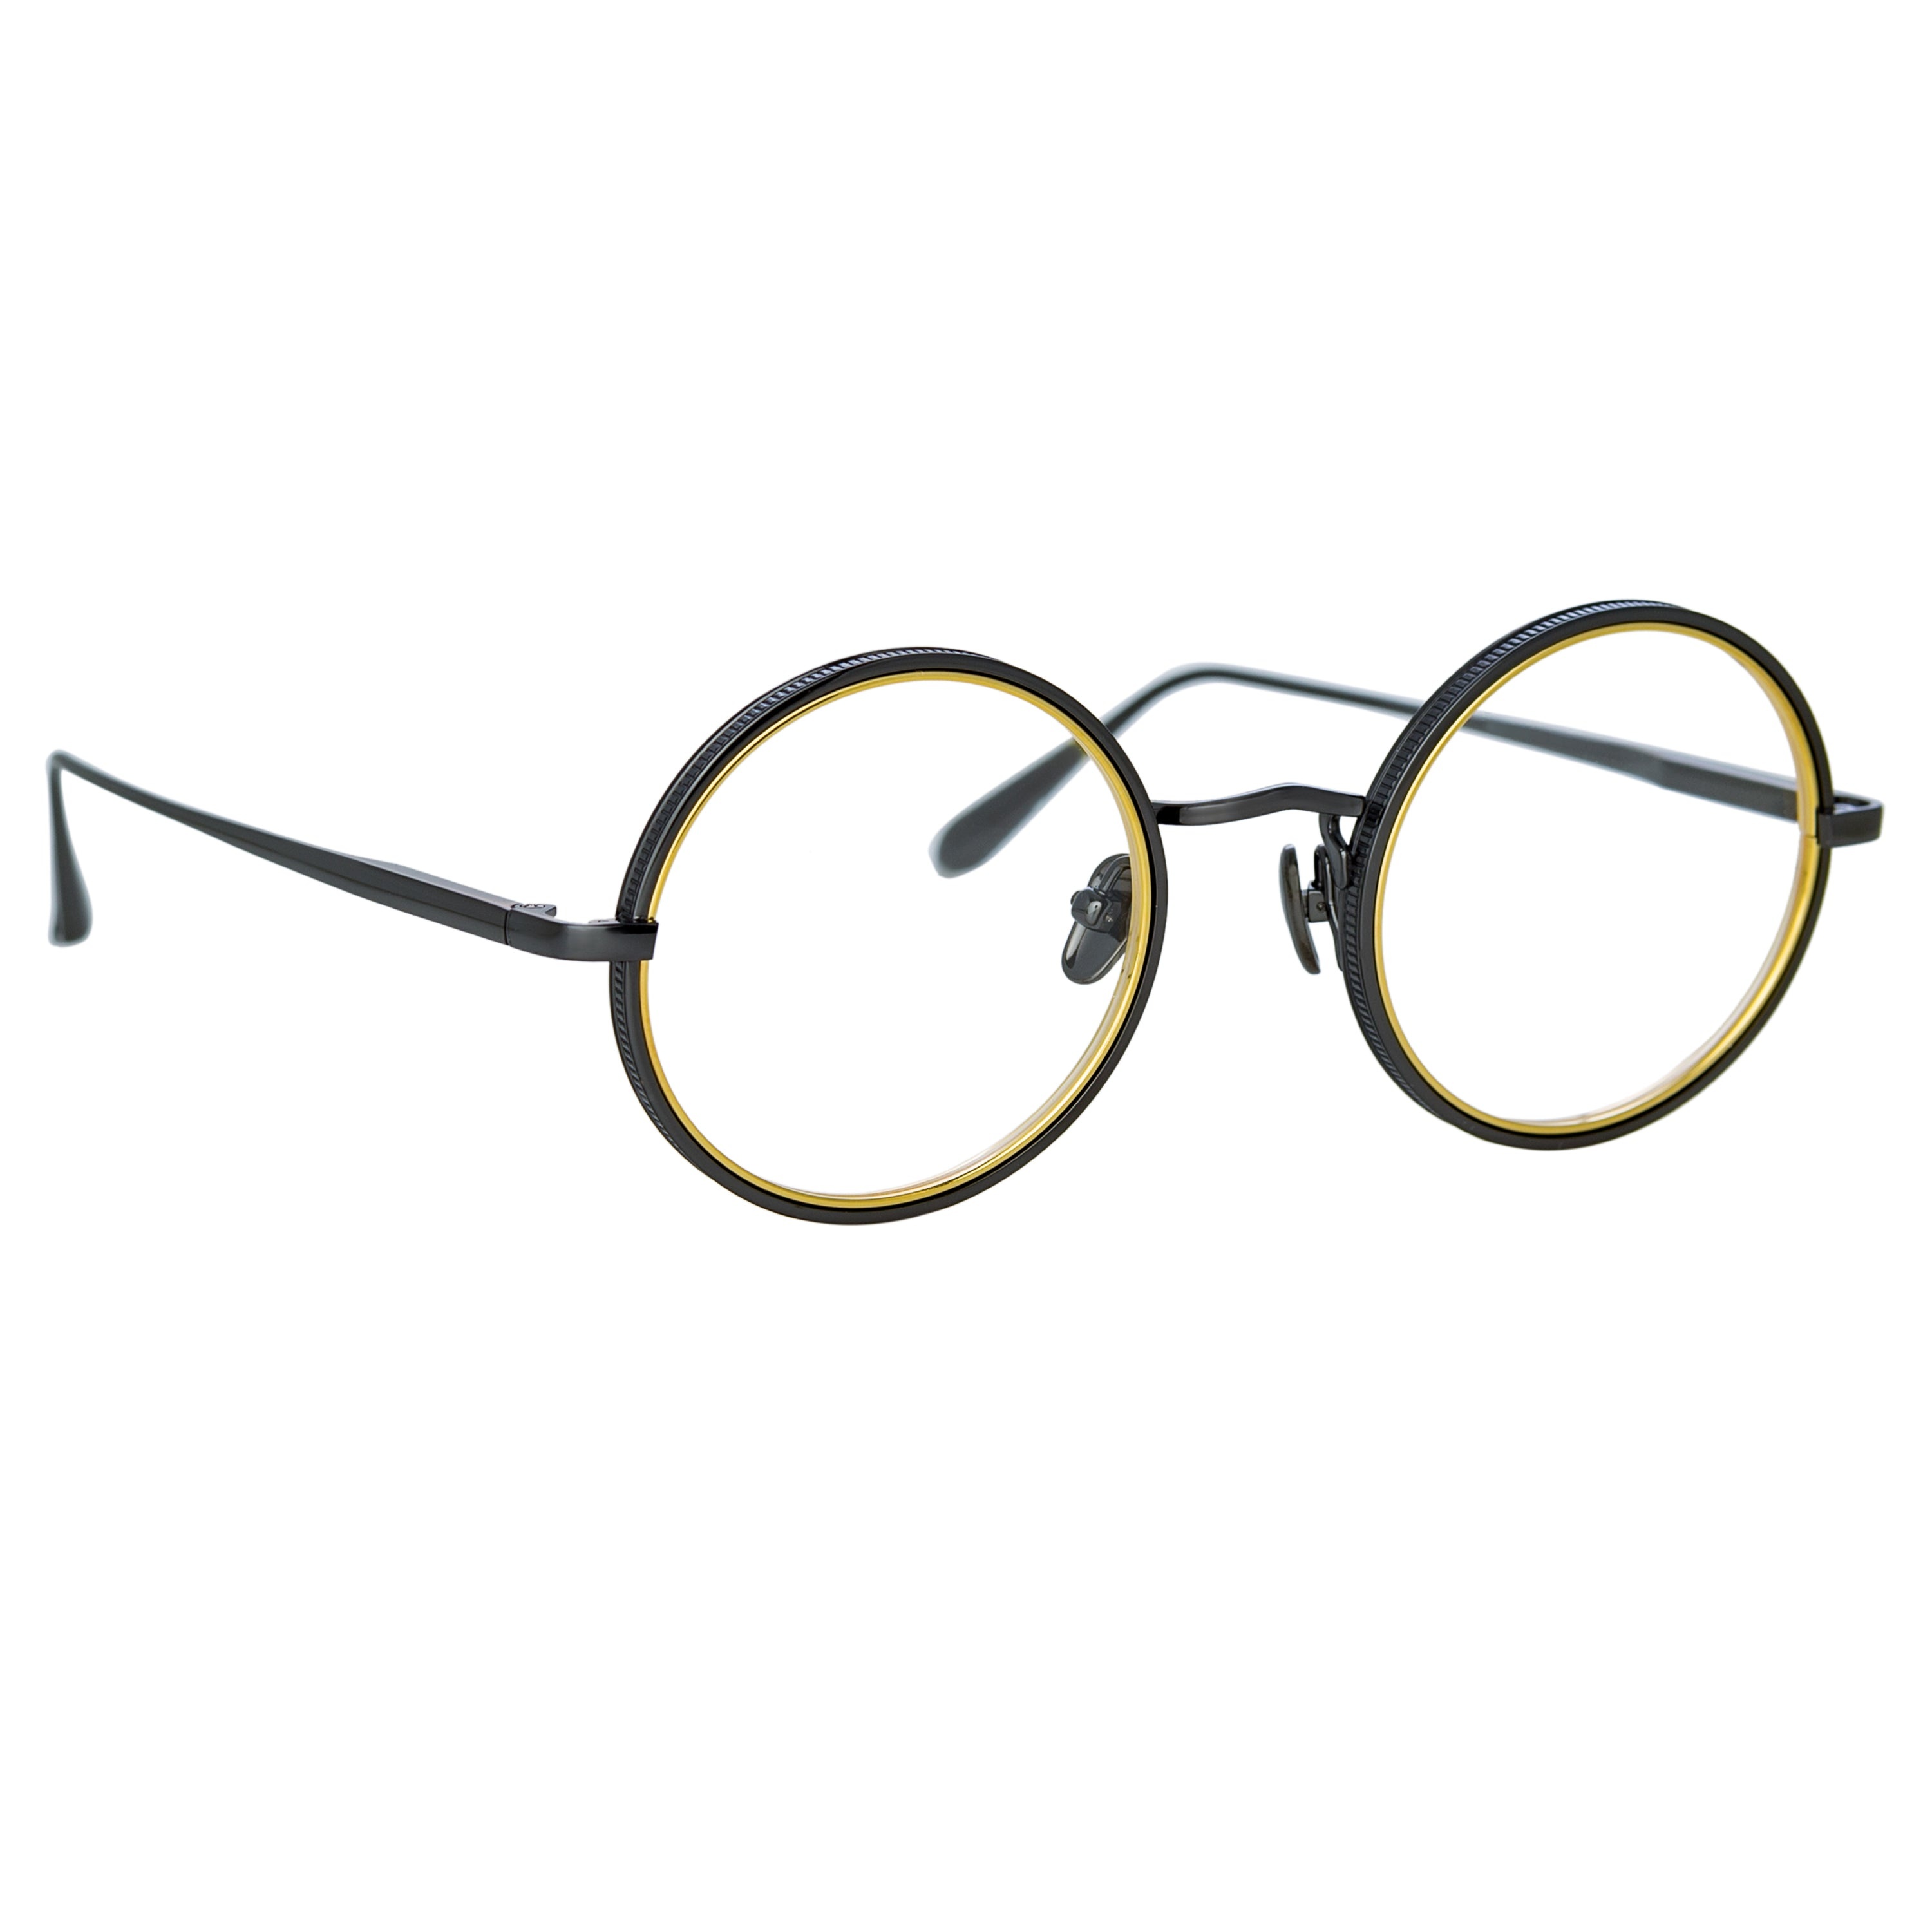 CORTINA OVAL OPTICAL FRAME IN NICKEL AND YELLOW GOLD - 2